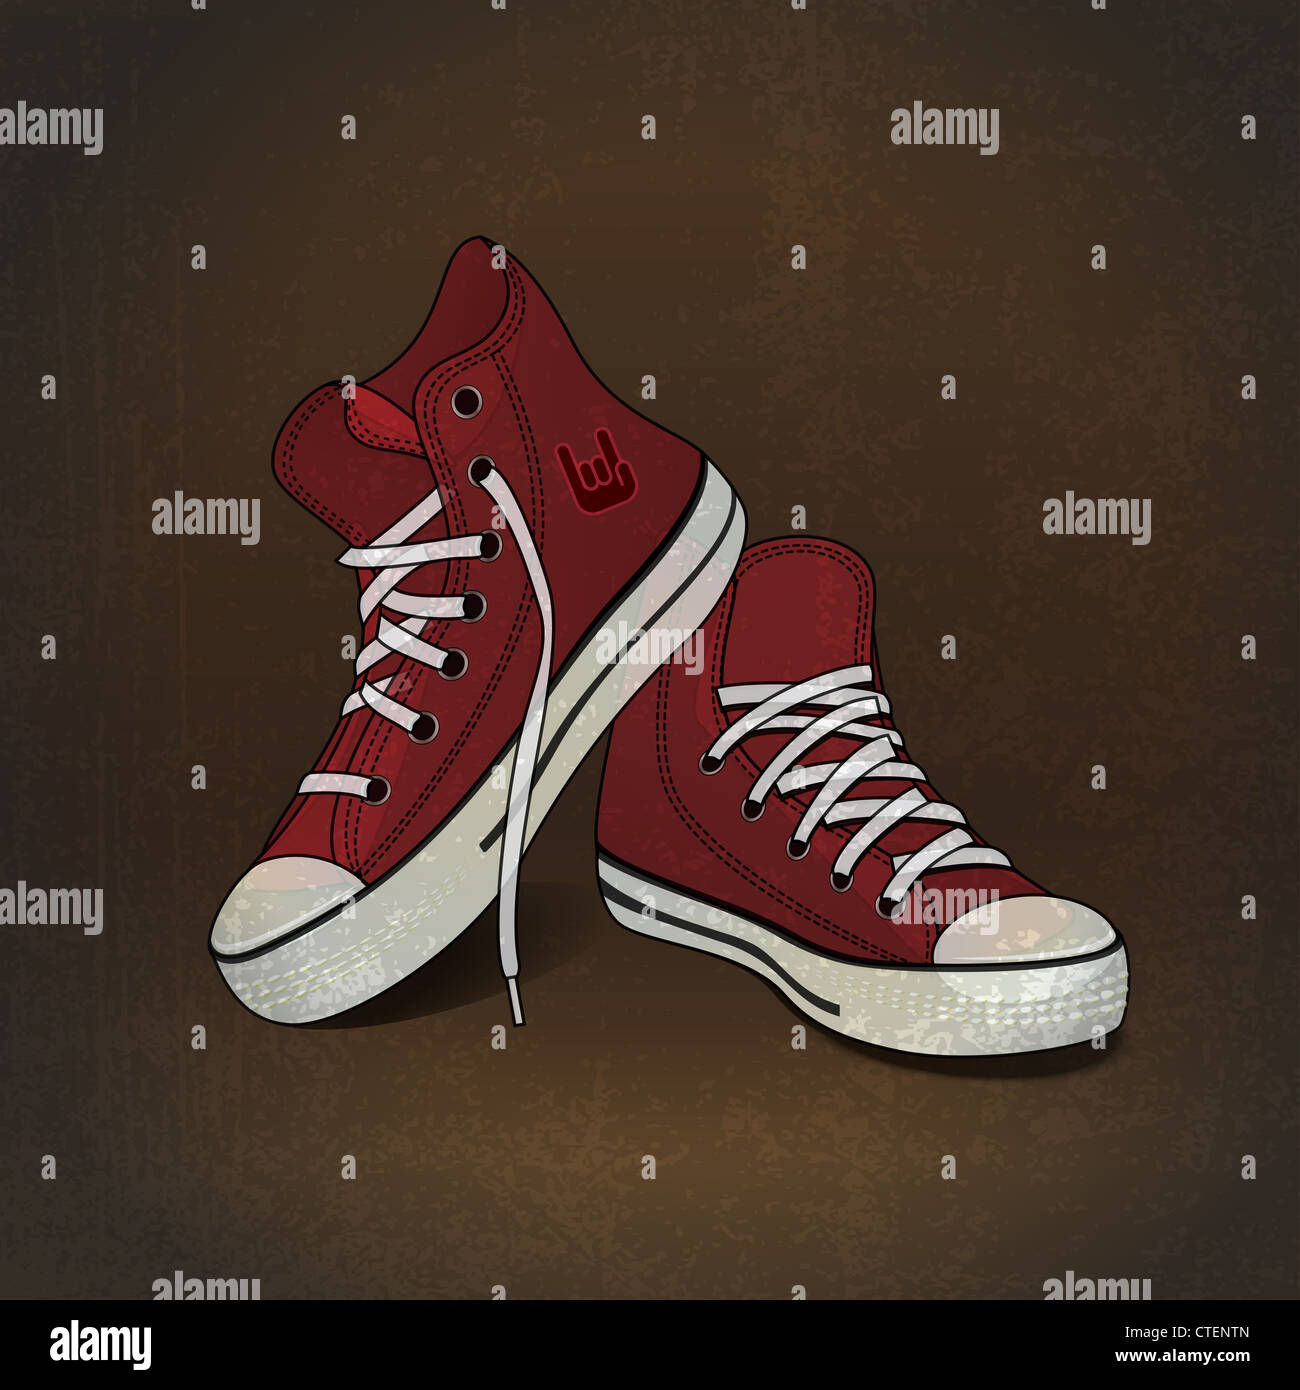 illustration red sneakers on grunge background Stock Photo